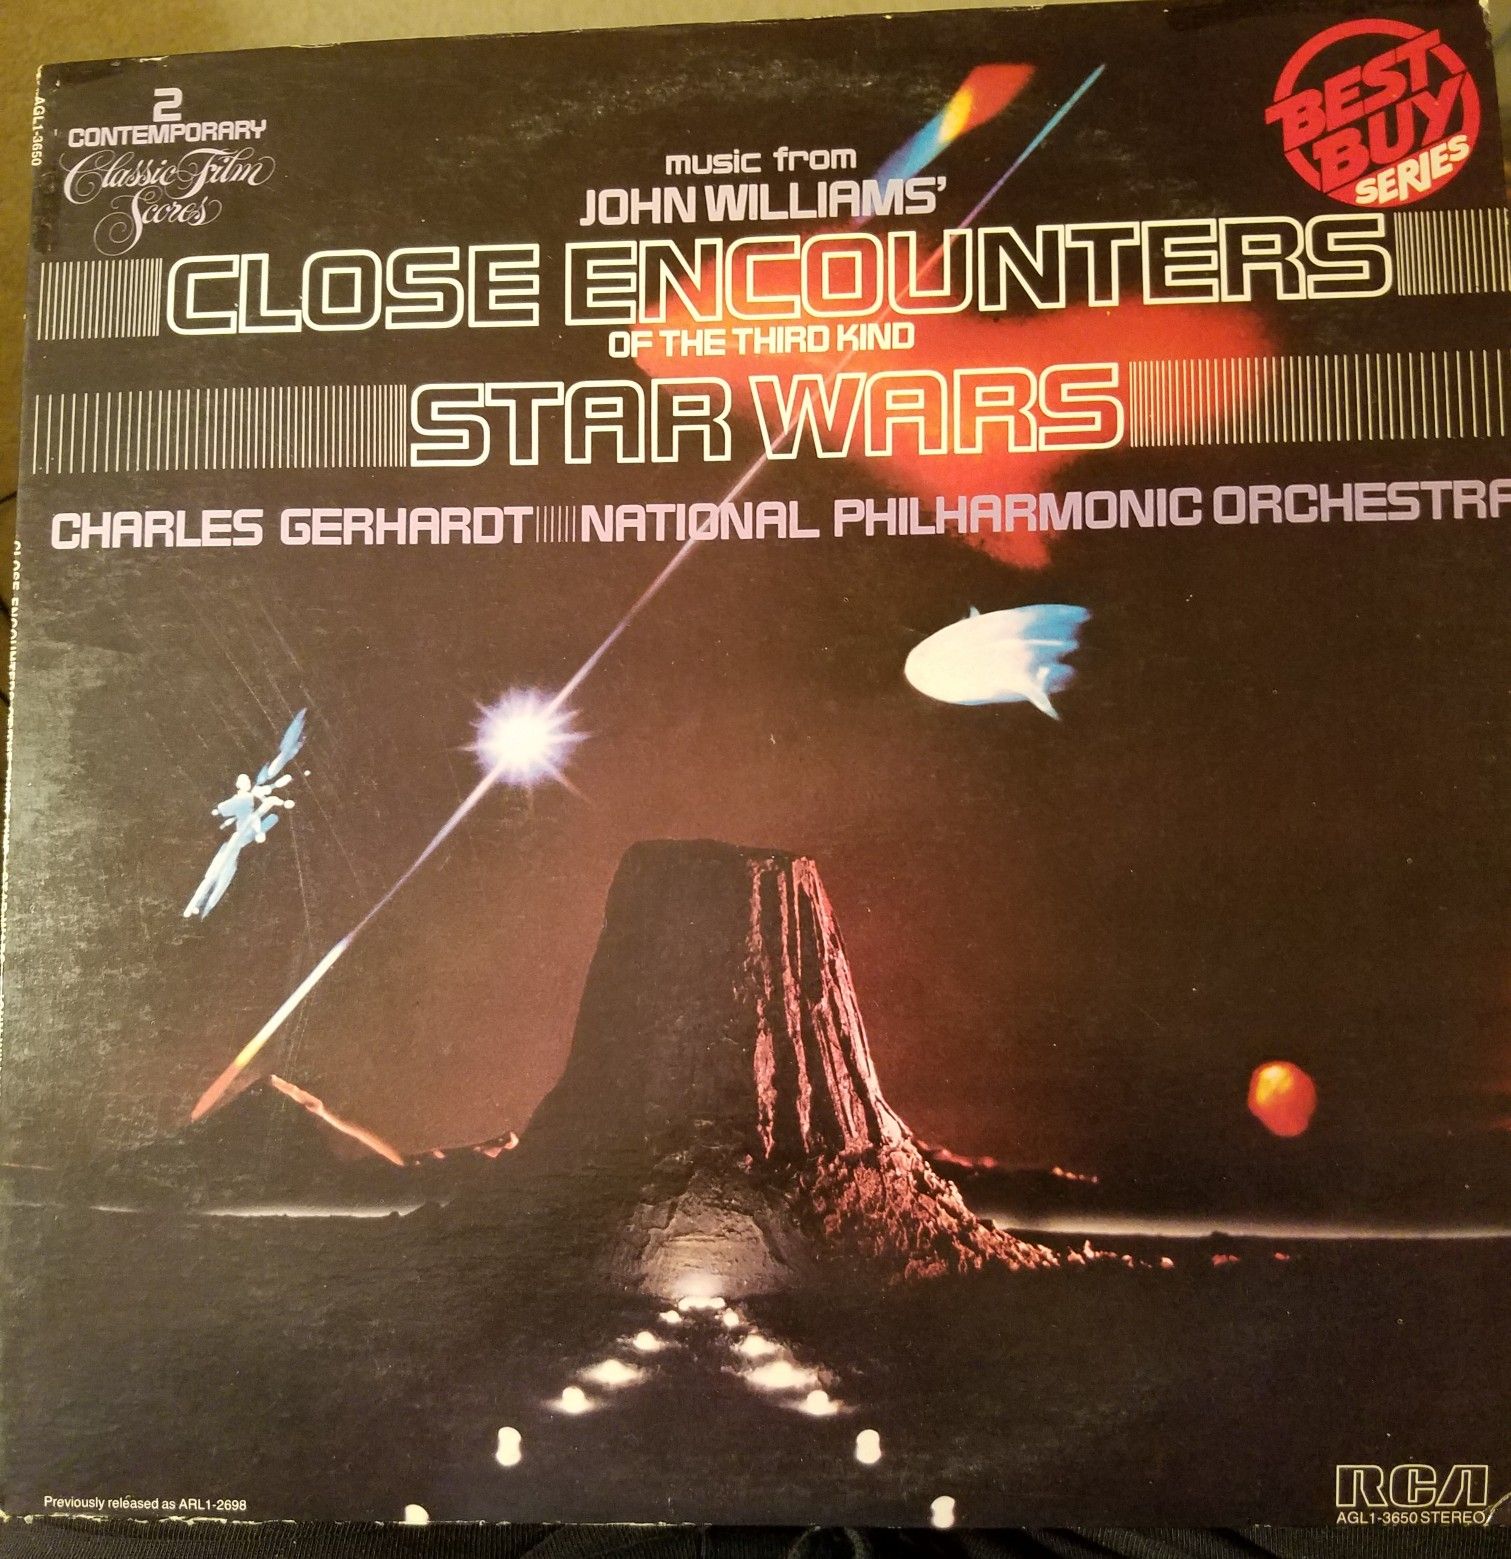 CLOSE ENCOUNTERS OF THE THIRD KIND VINYL RECORD